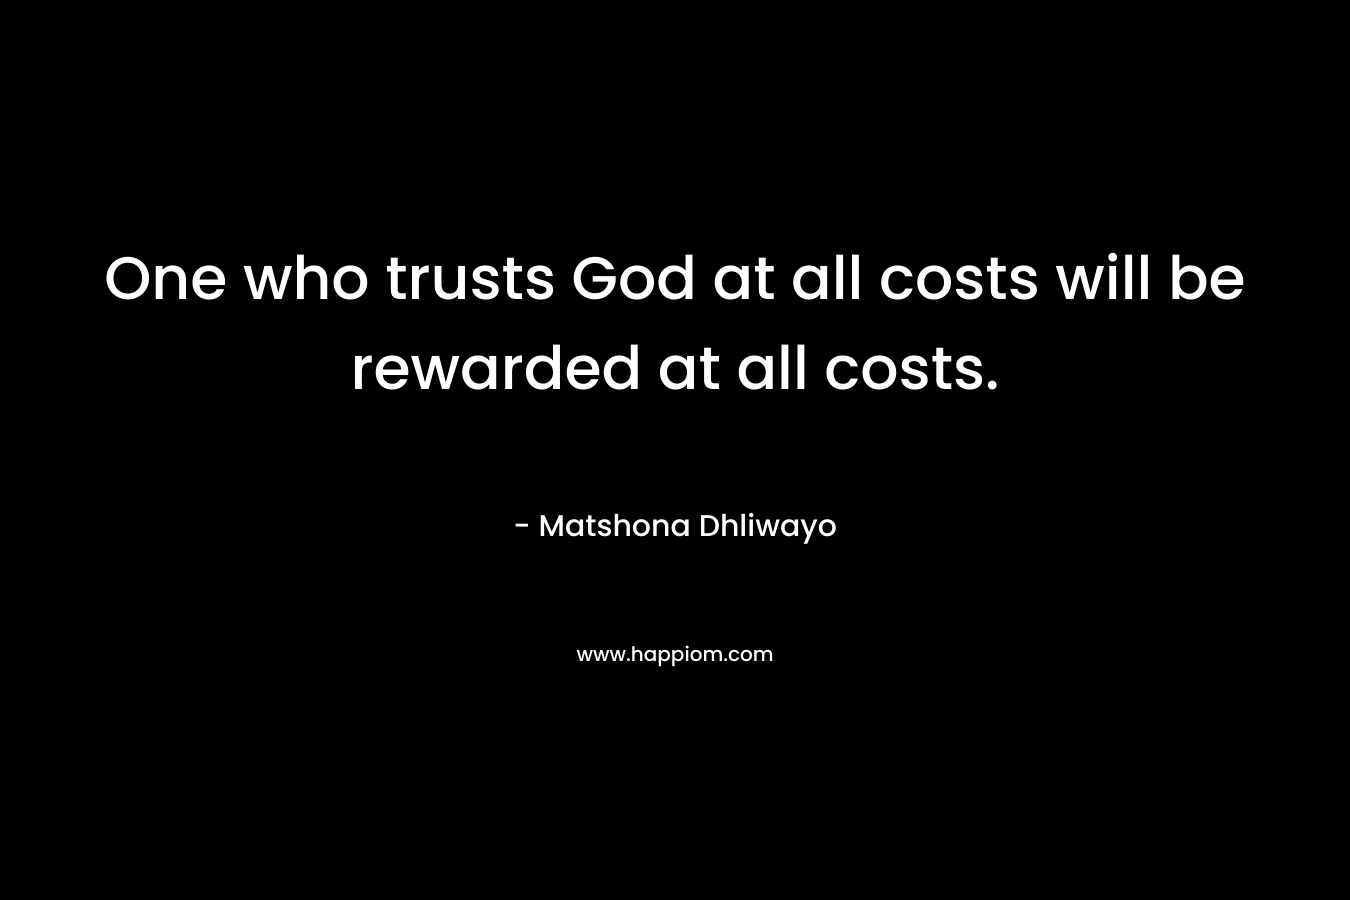 One who trusts God at all costs will be rewarded at all costs. – Matshona Dhliwayo